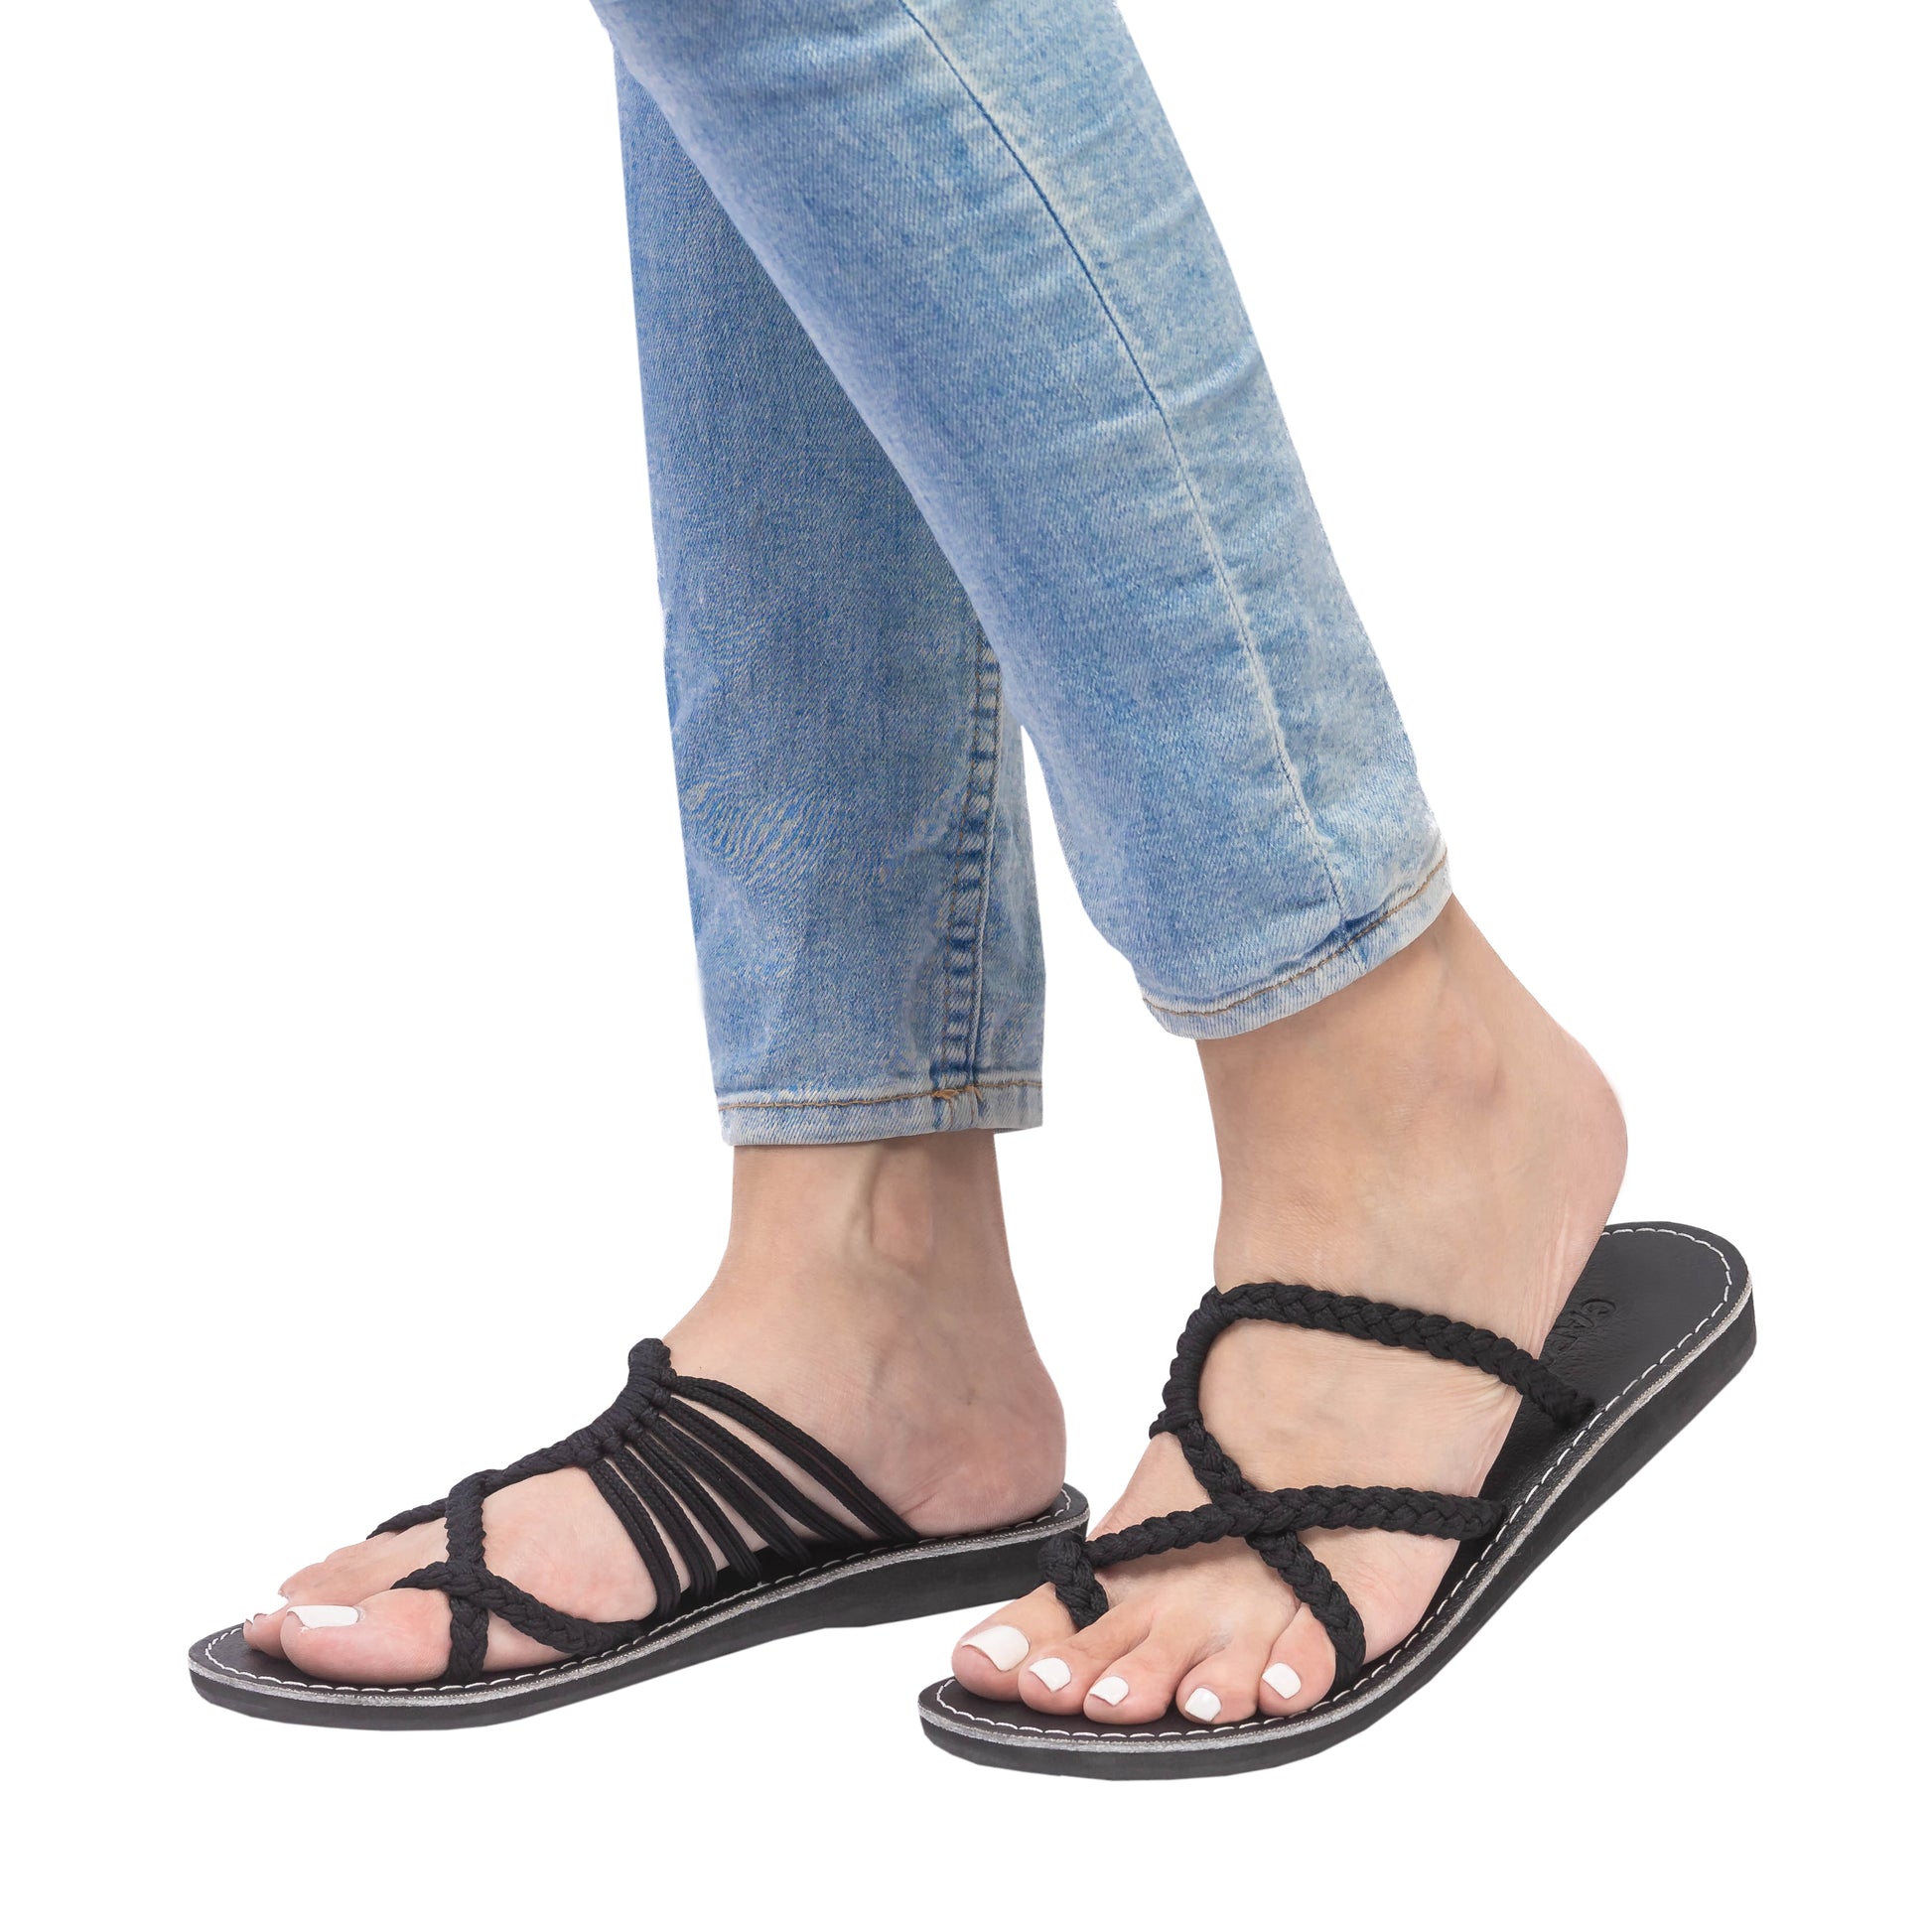 Hand woven sandals Classic Black on model